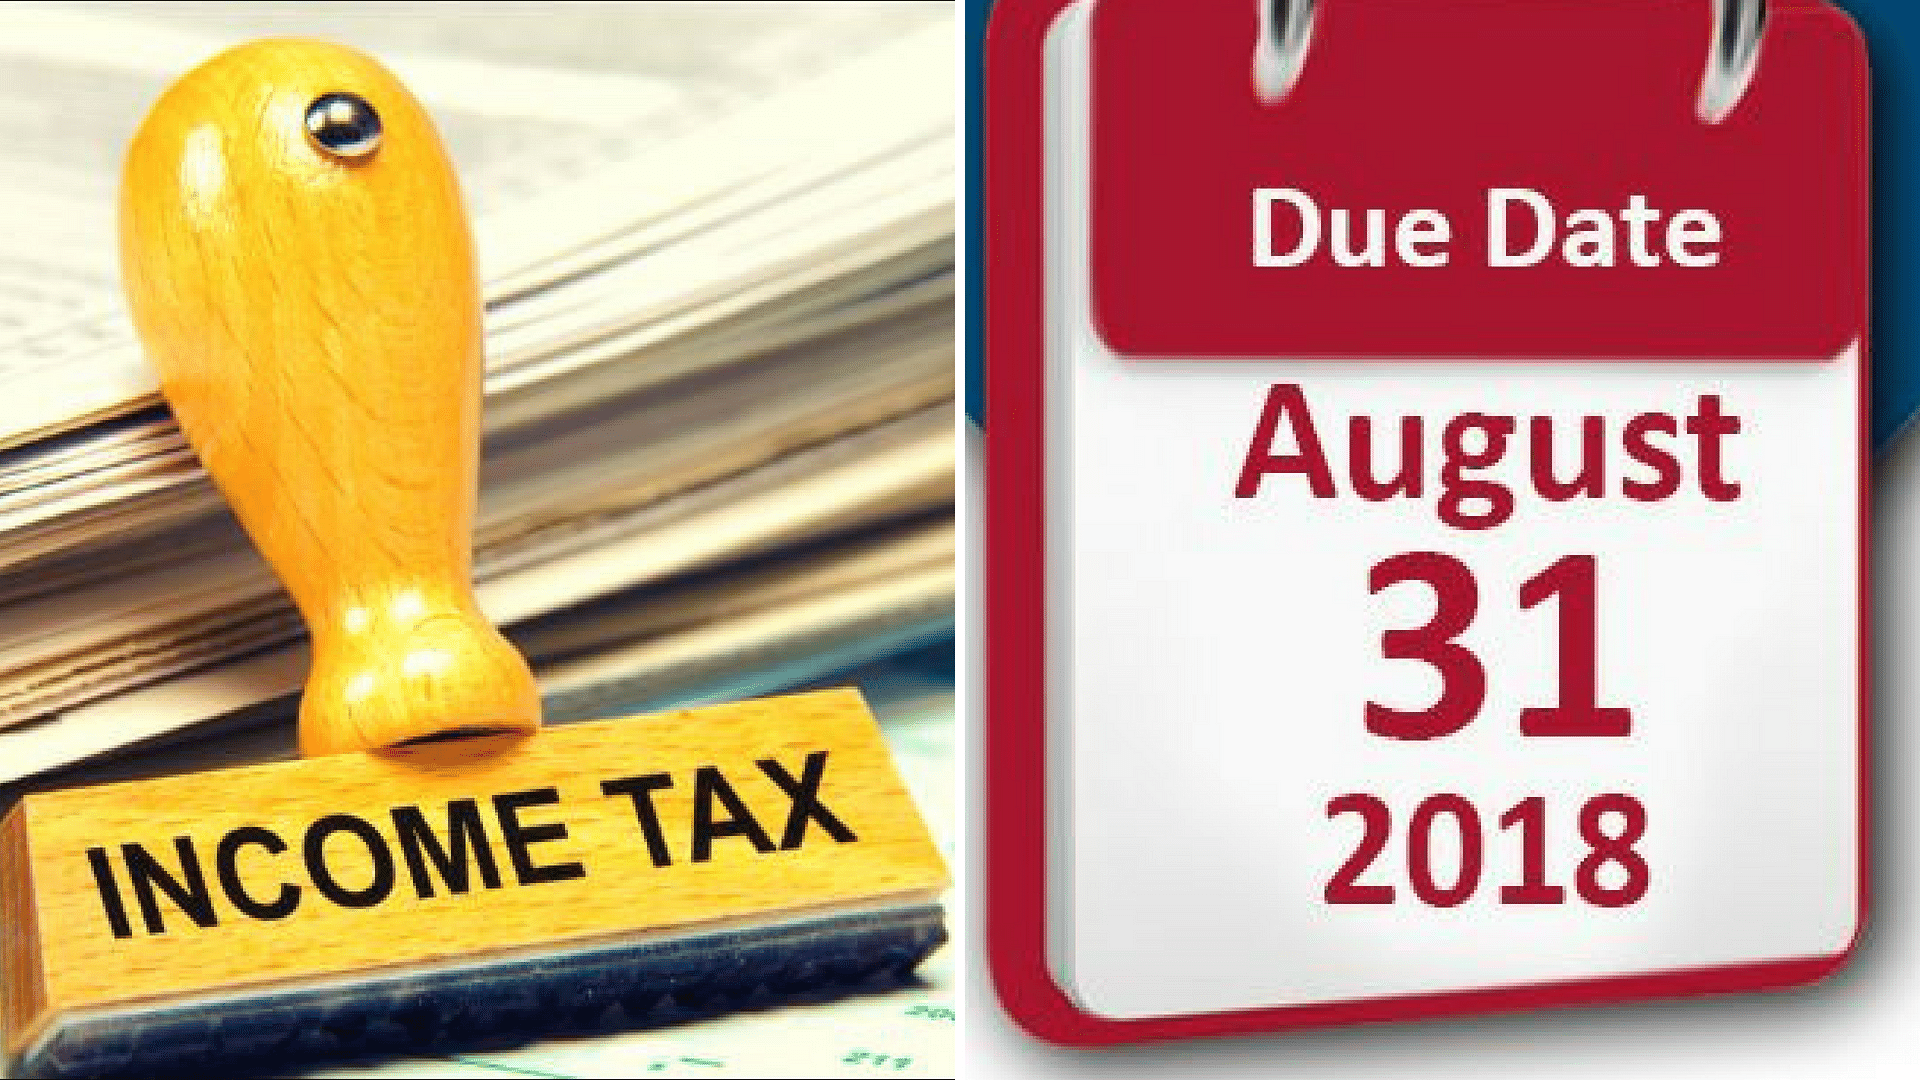 Since the income tax deadline has been extended to 31st August, why not try and file your Income Tax Returns on your own?